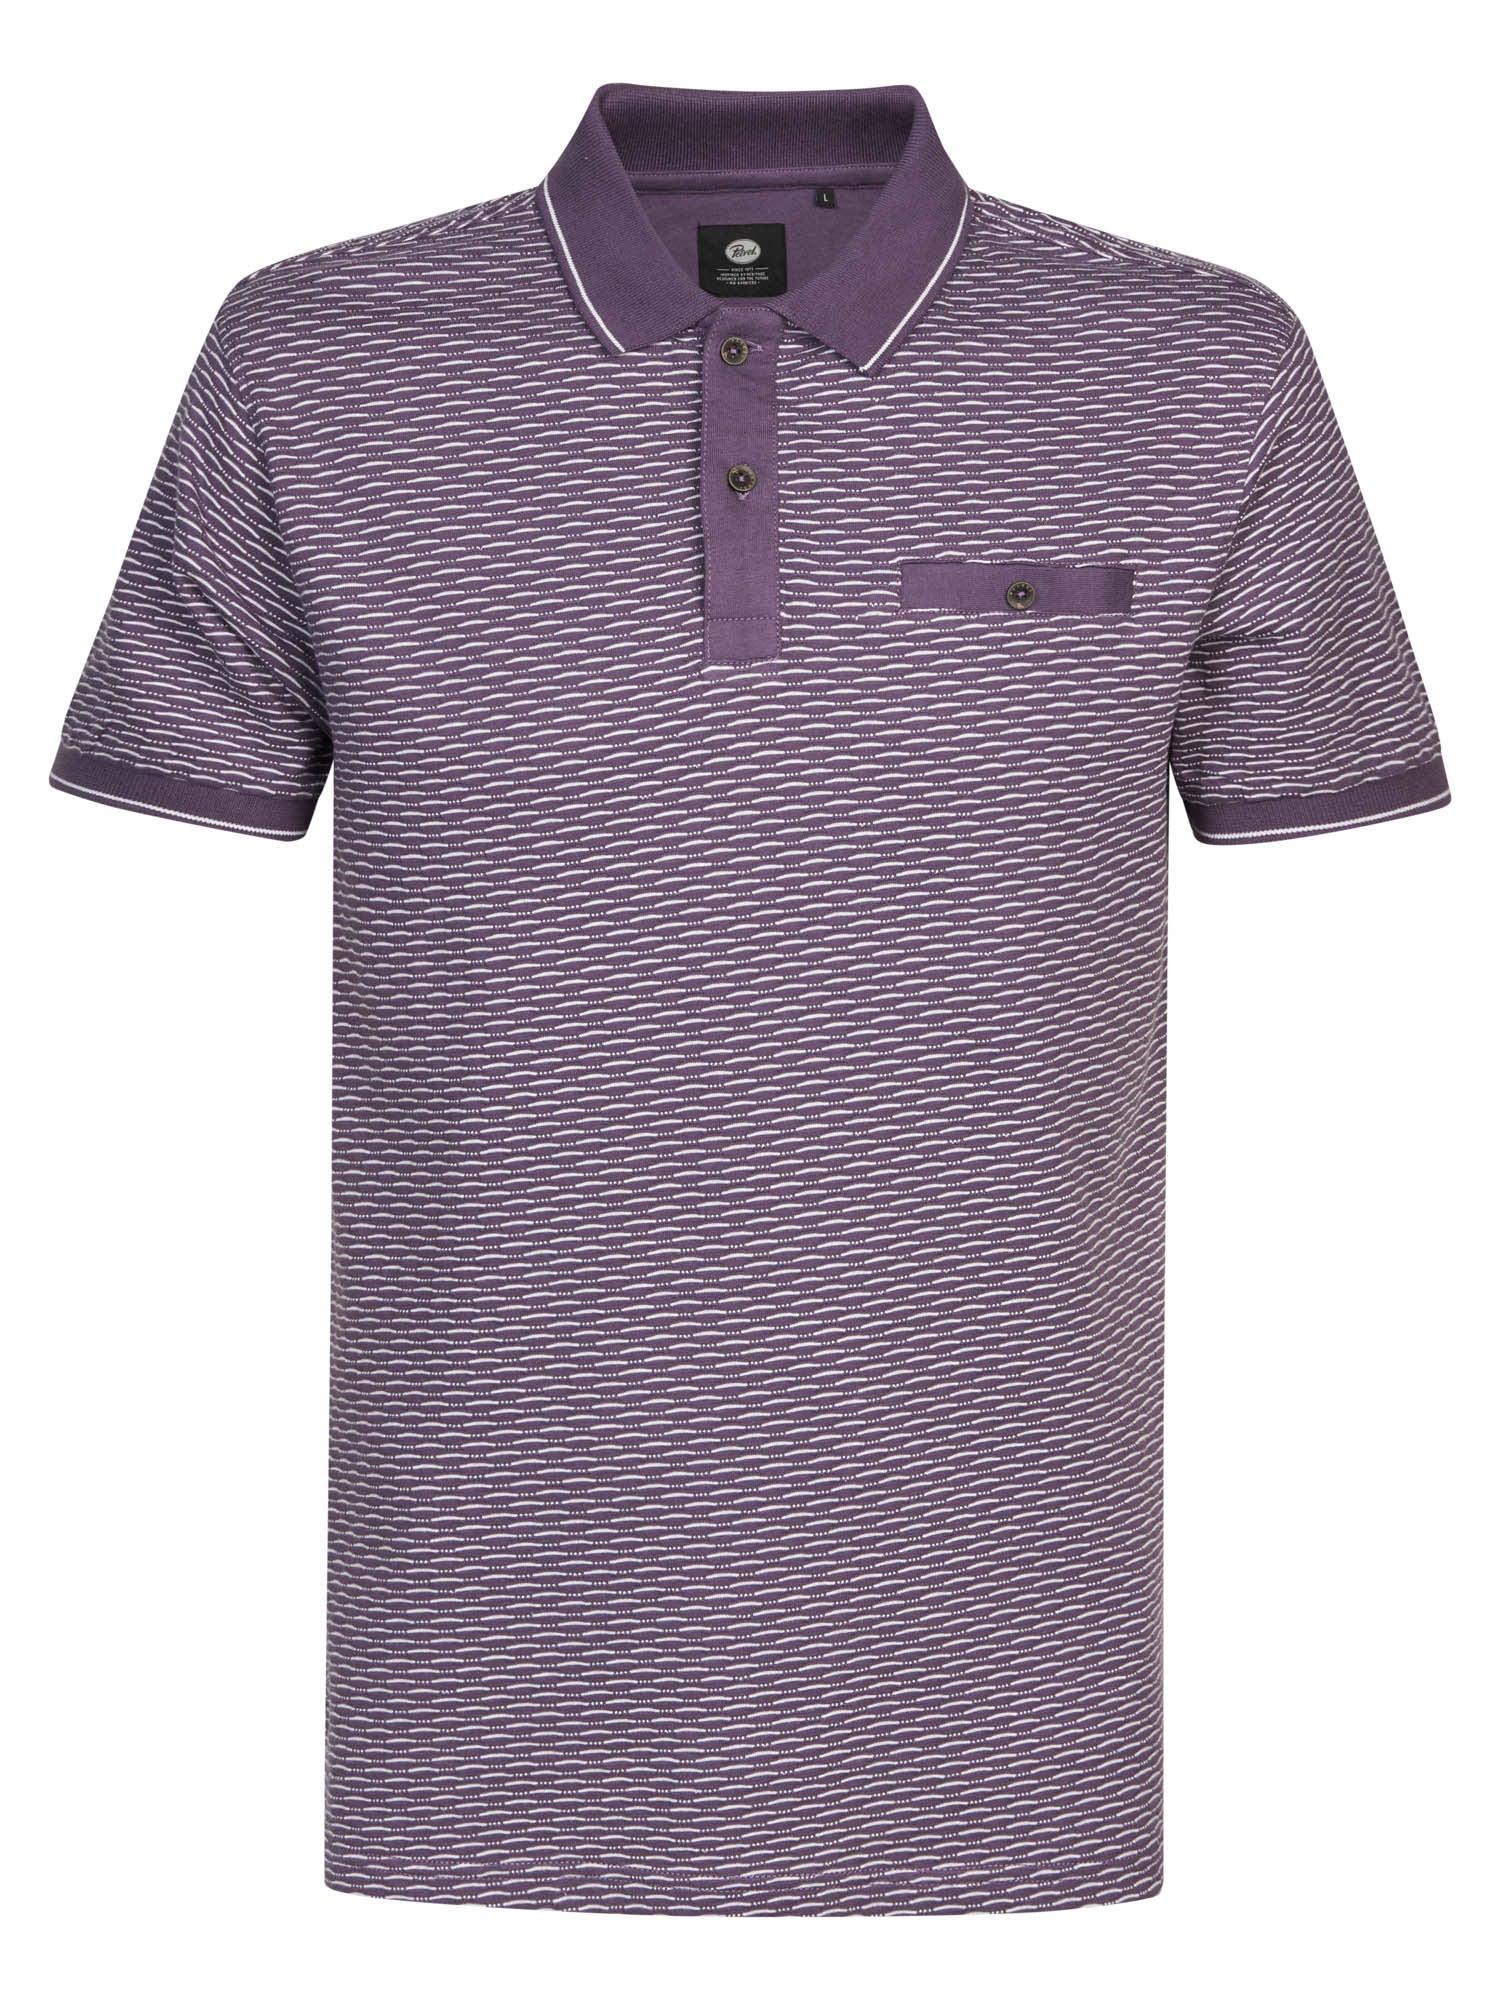 Petrol Industries - Heren All-over print polo - Paars - Maat L